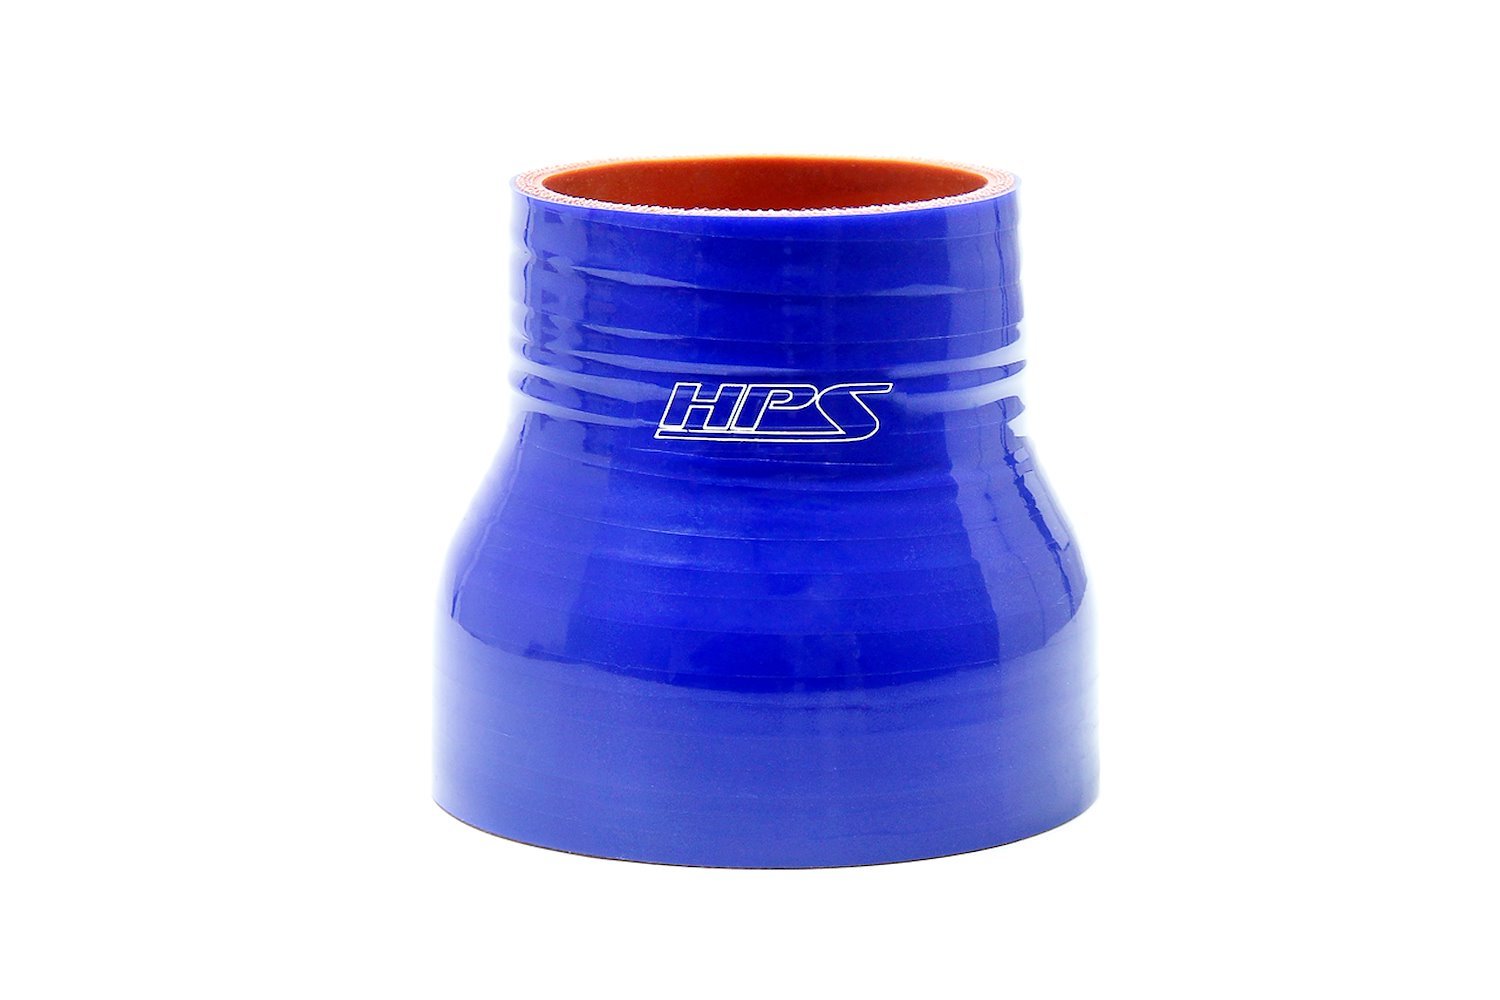 HTSR-300-350-L6-BLUE Silicone Reducer Hose, High-Temp 4-Ply Reinforced, 3 in. - 3-1/2 in. ID, 6 in. Long, Blue